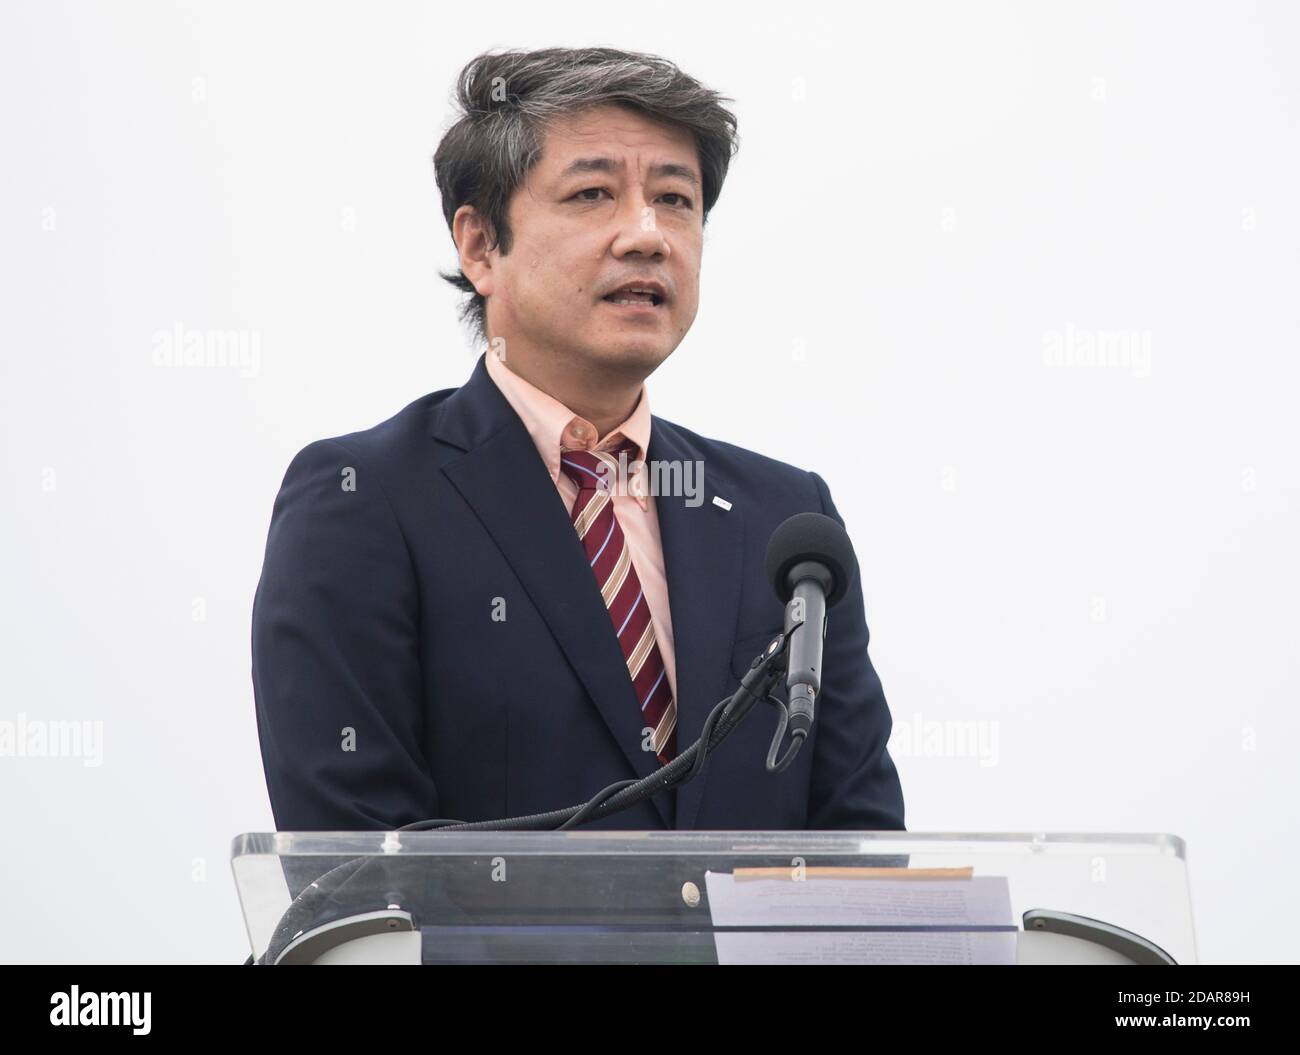 Junichi Sakai, manager of the International Space Station Program for the Japan Aerospace Exploration Agency, speaks to members of the media during a press conference ahead of the Crew-1 launch at the Kennedy Space Center November 13, 2020 in Cape Canaveral, Florida. Stock Photo